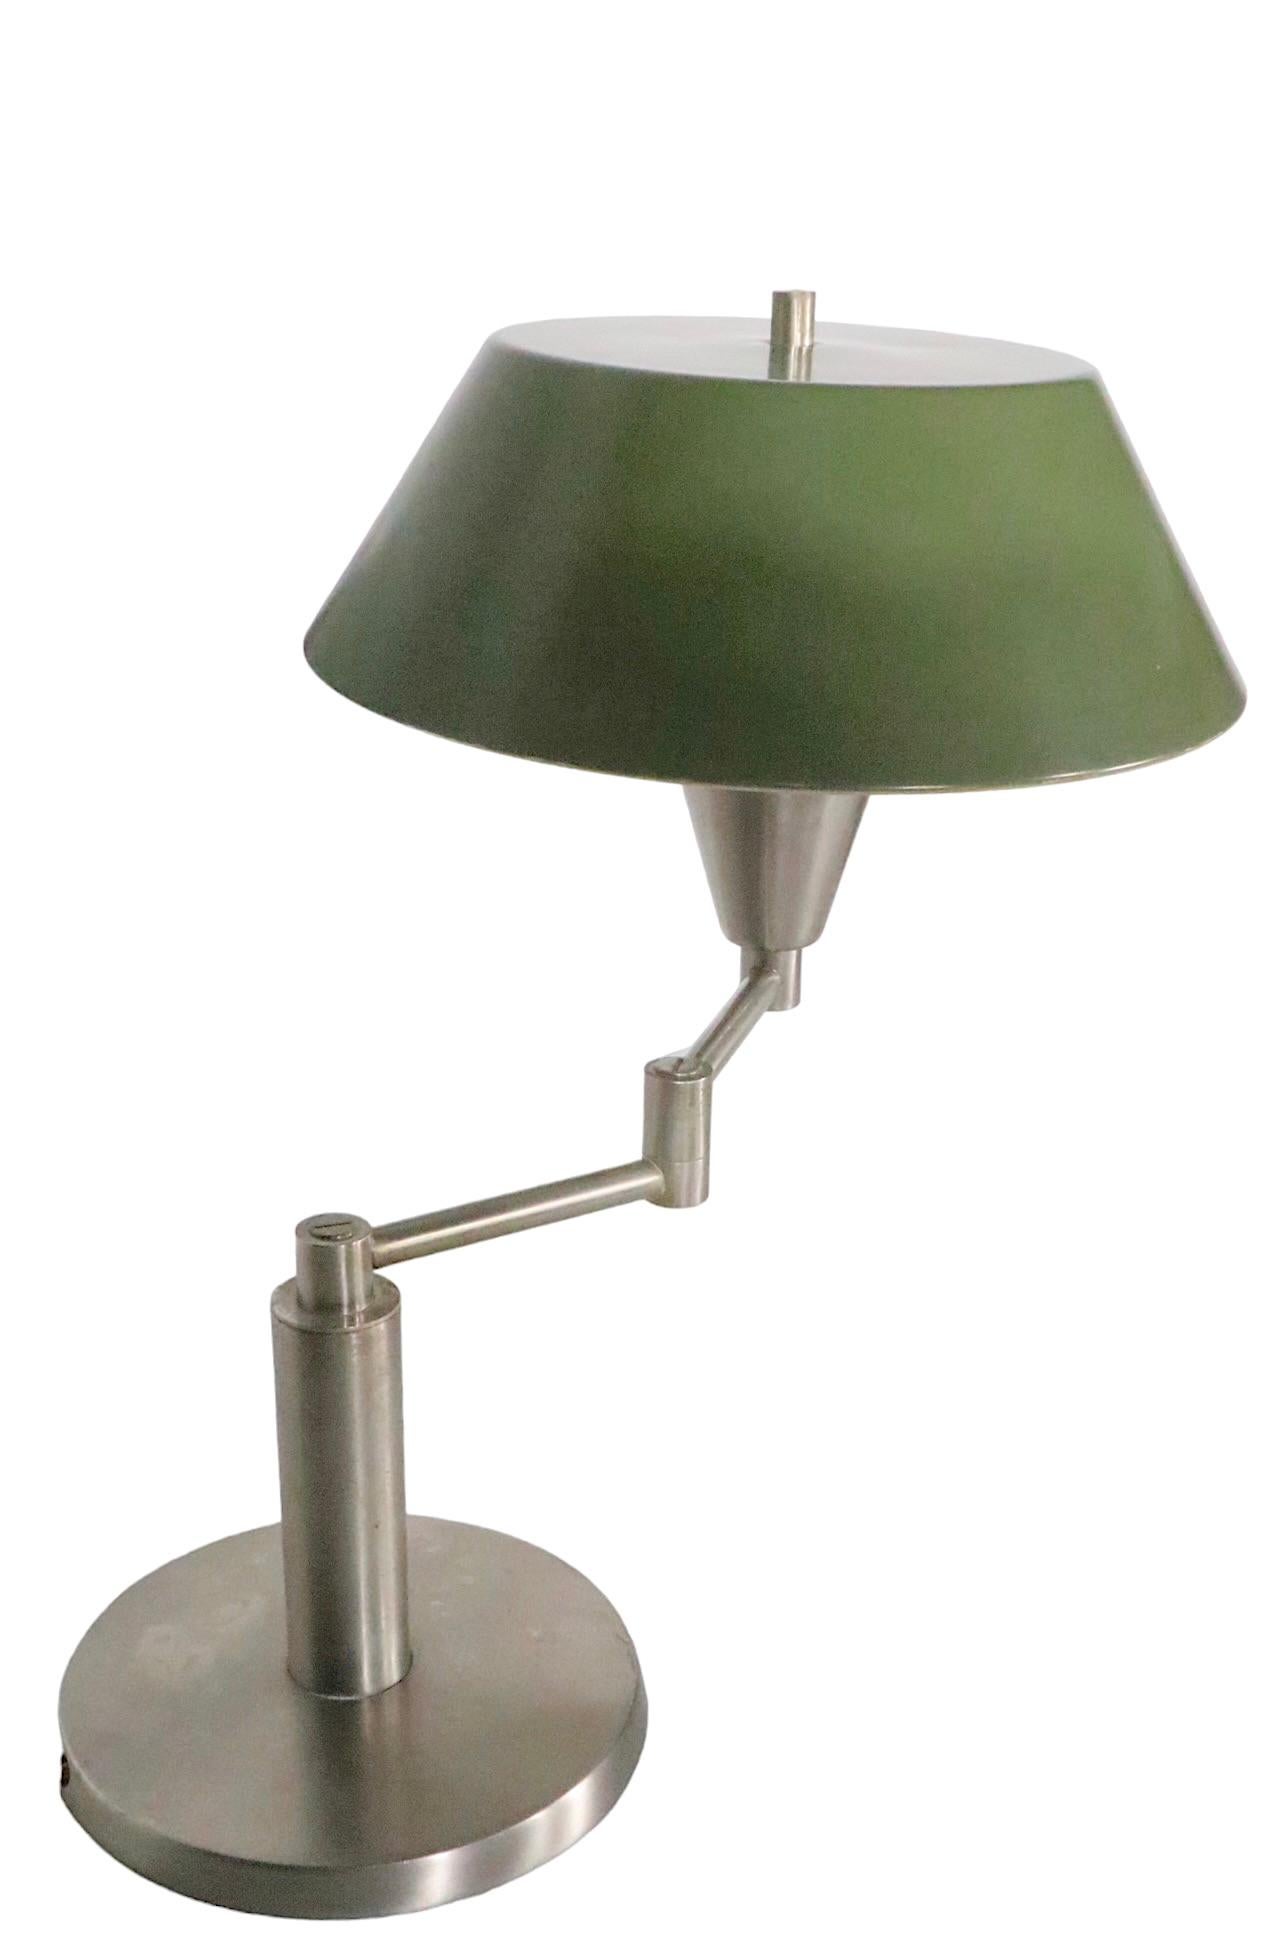 Iconic Walter Von Nessen Swing Arm Desk Lamp with Original Metal Shade For Sale 2